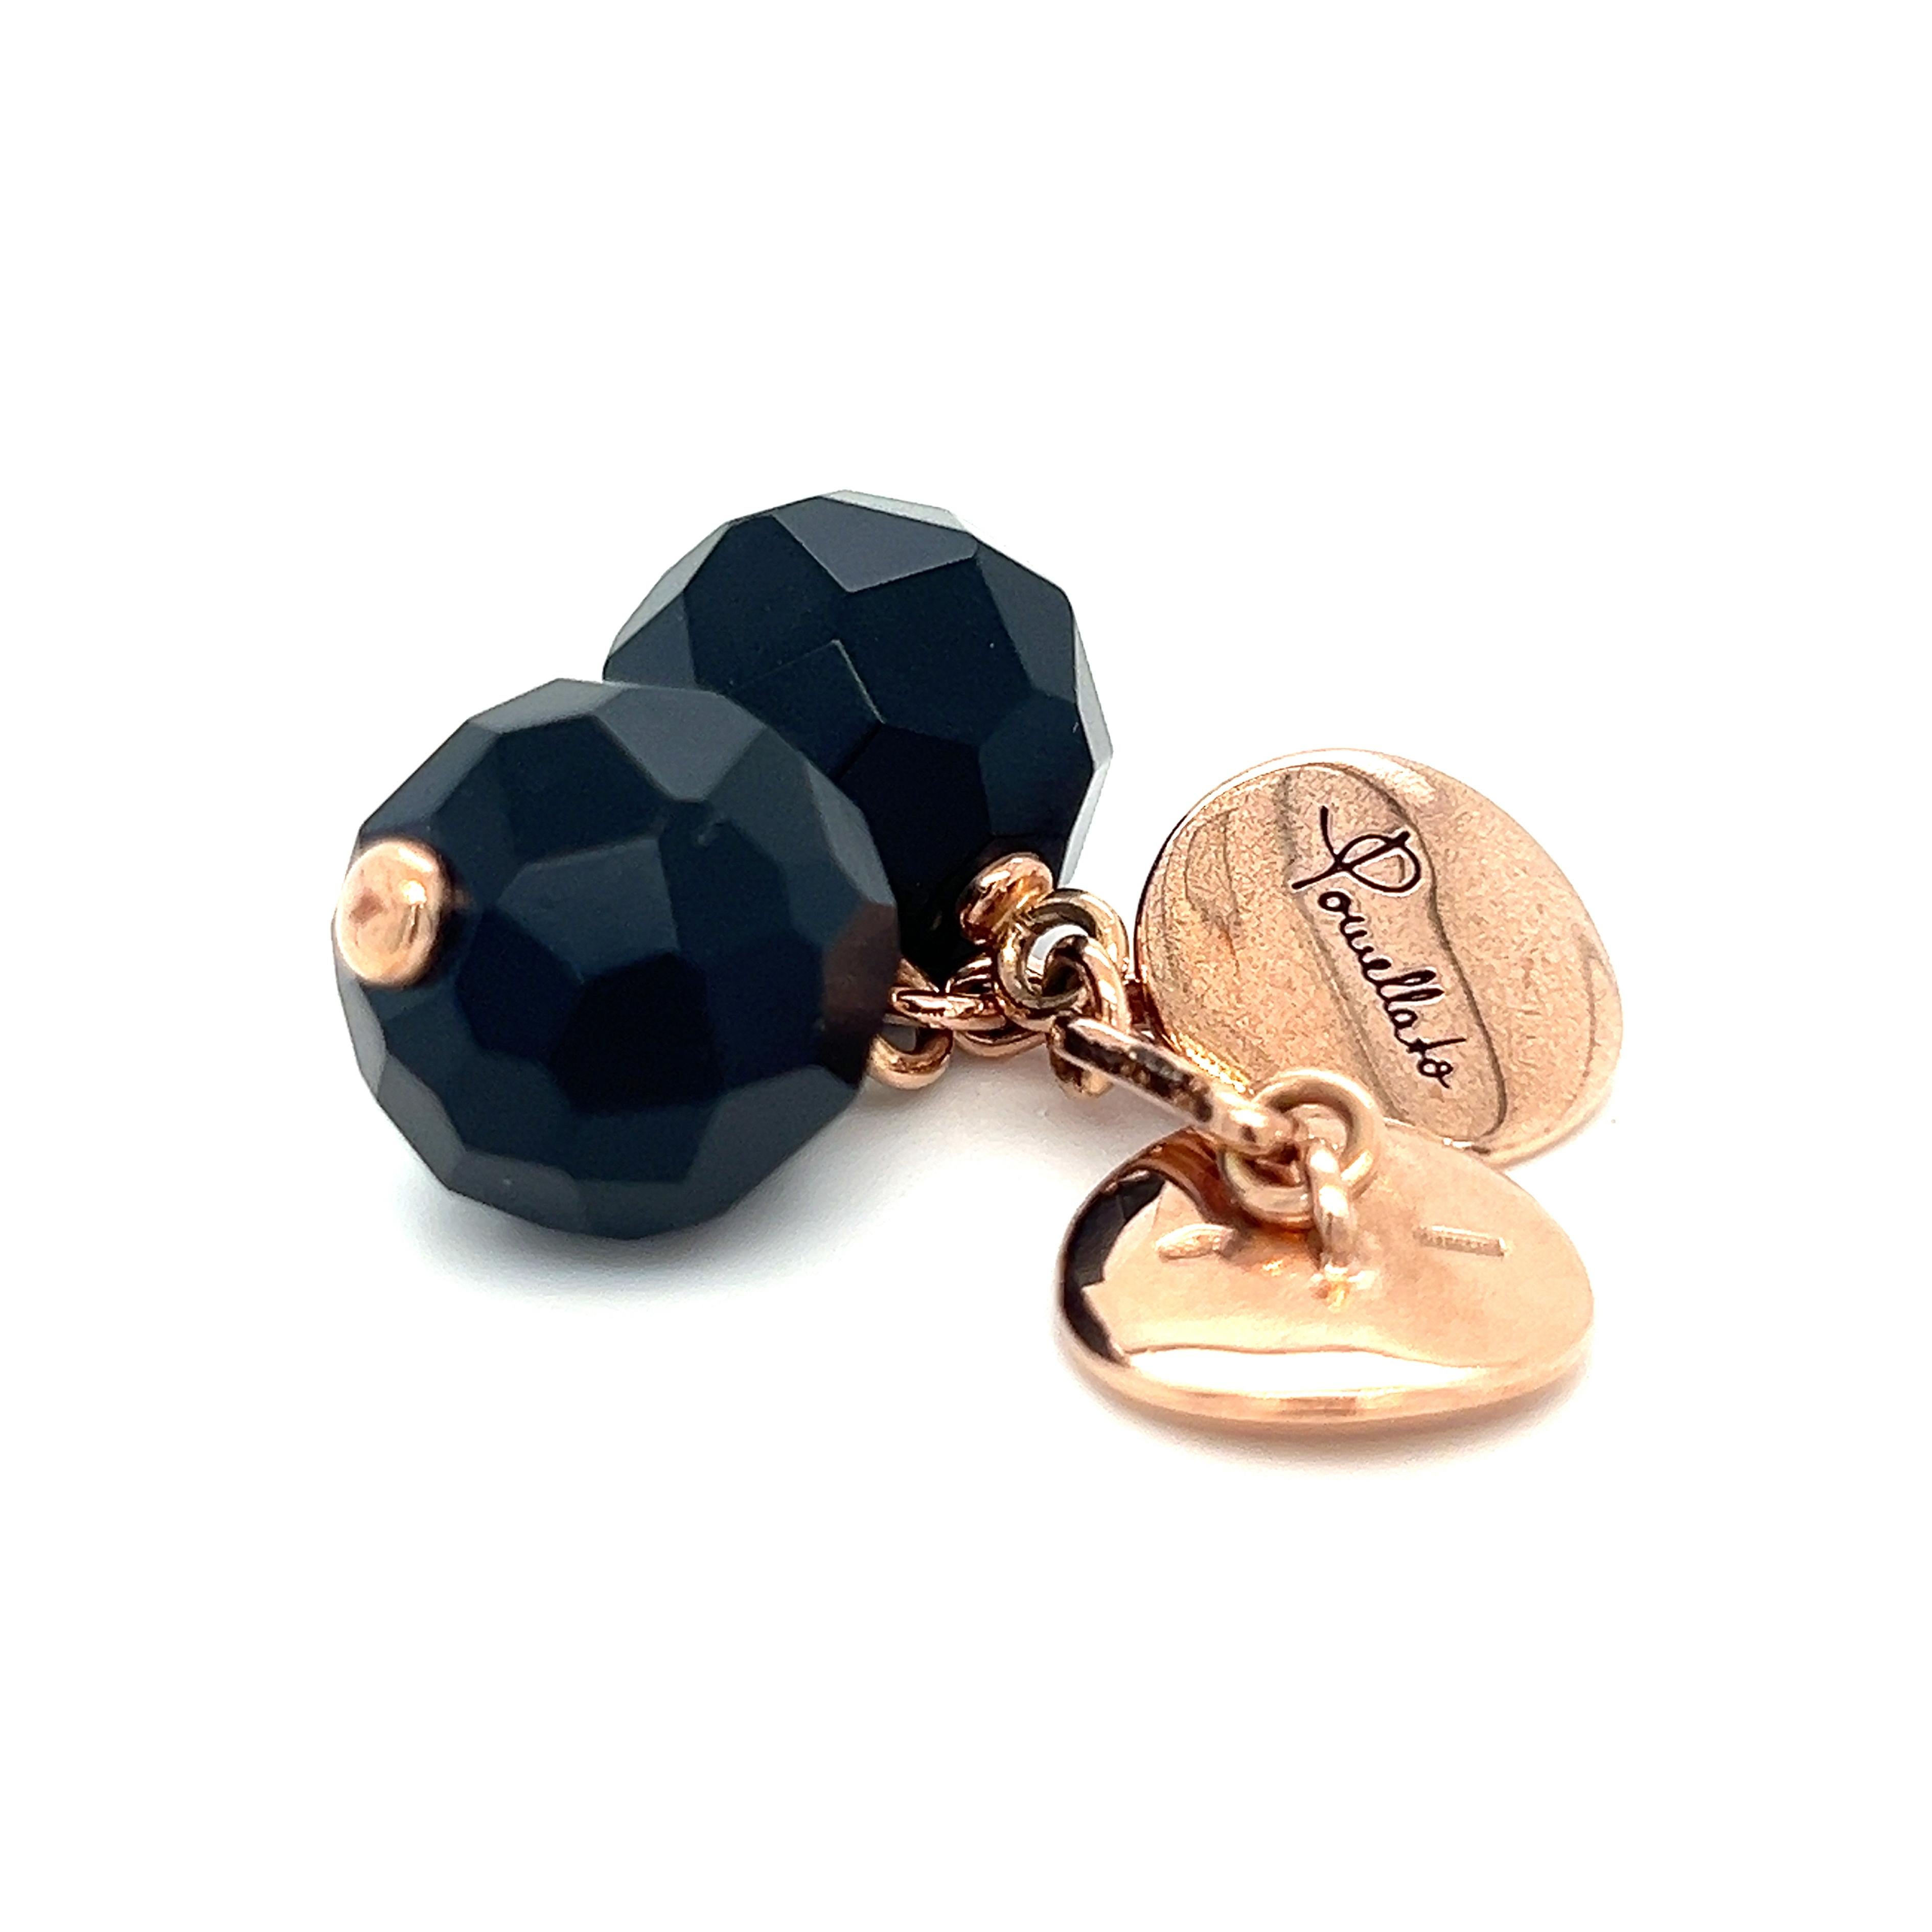 Original 2012 Iconic Pomellato Victoria Jet Faceted Ball Rose Gold Cufflinks For Sale 4